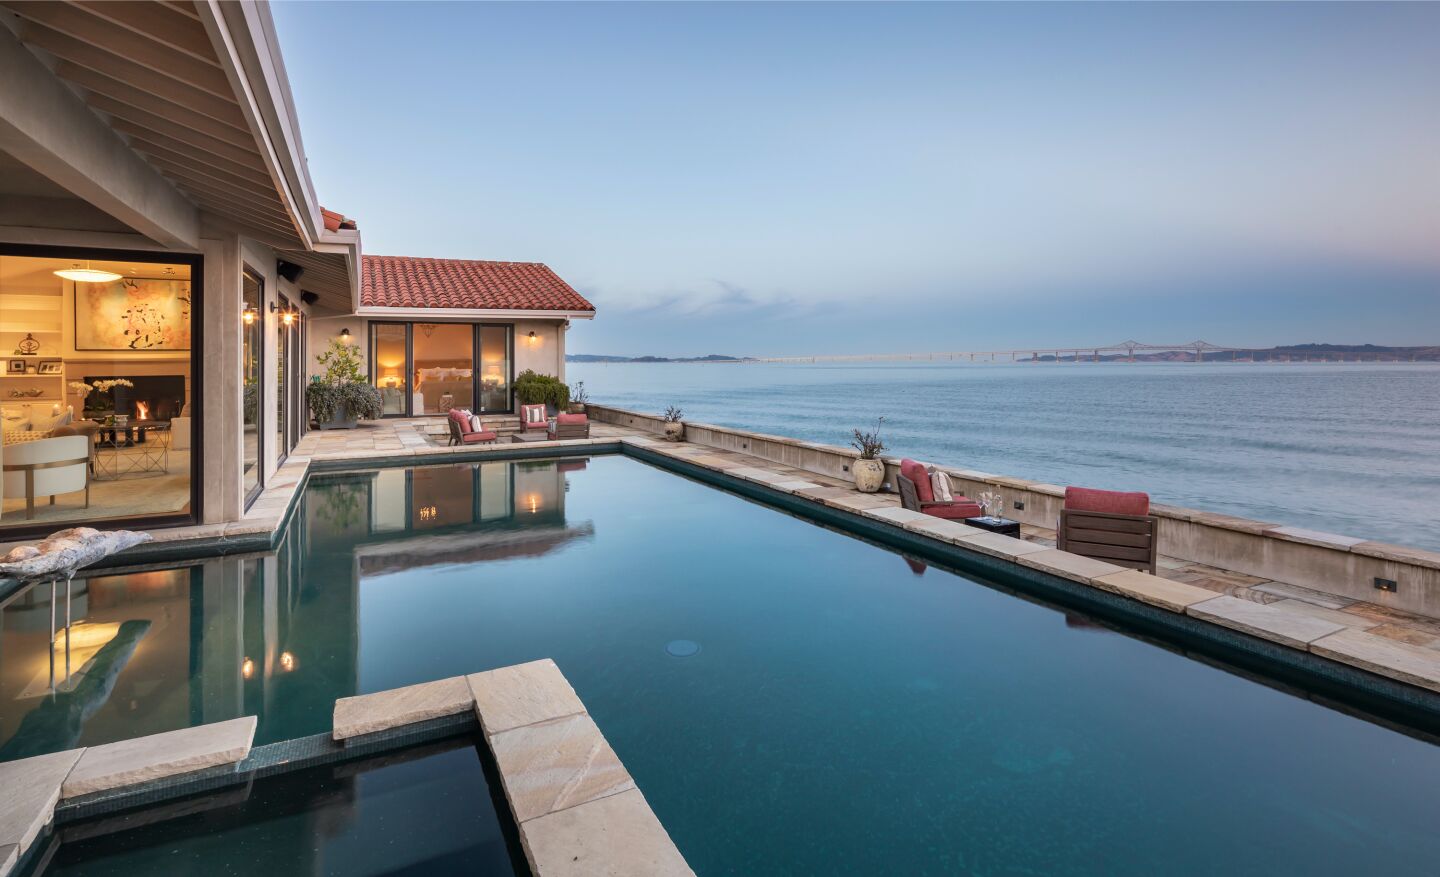 A swimming pool, house and deck overlooking the bay.